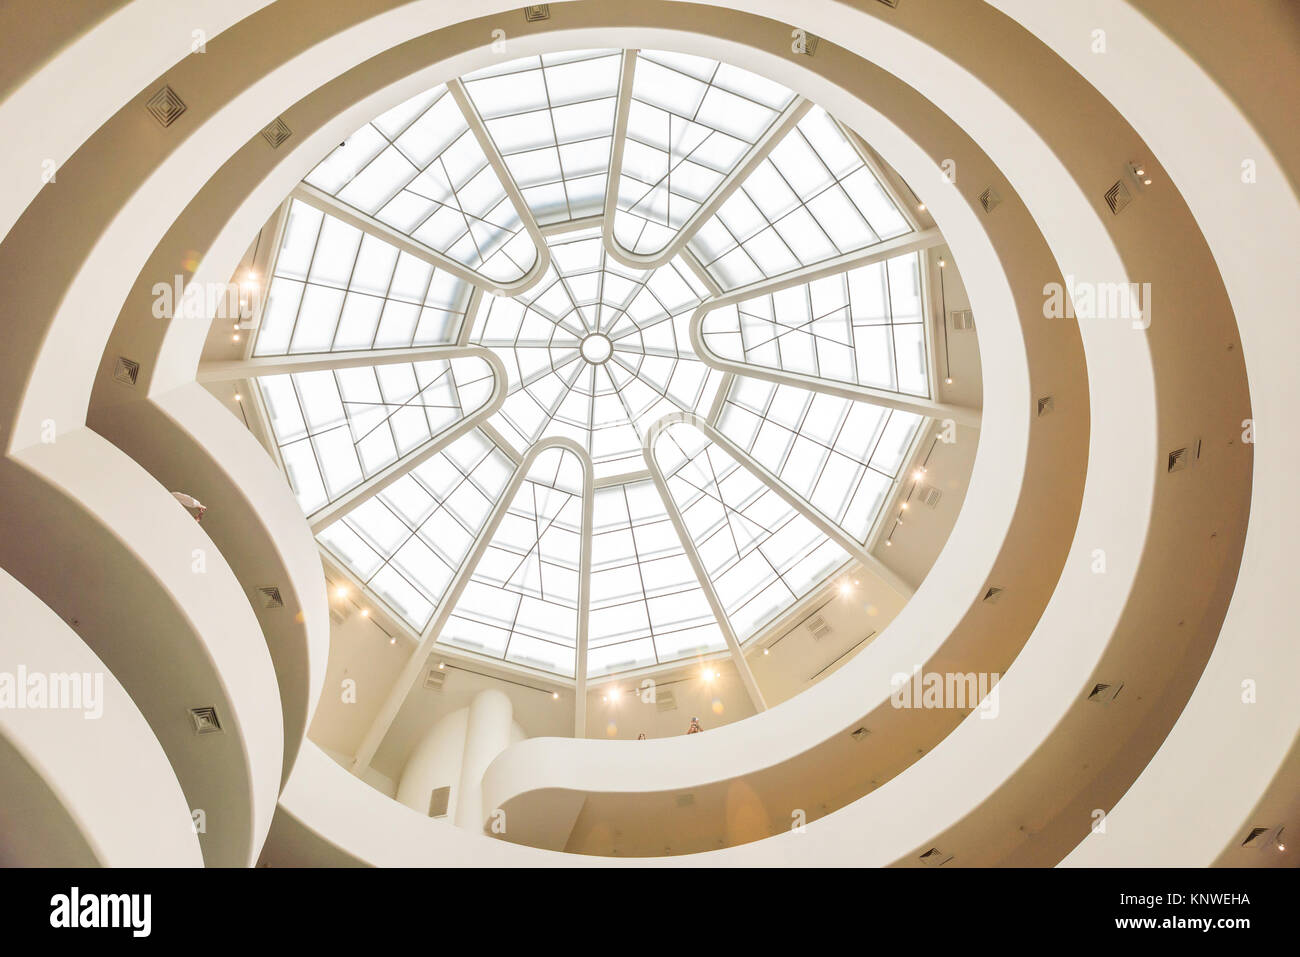 NEW YORK CITY - JULY 10: Interior of the Solomon R. Guggenheim Museum of modern and contemporary art in New York on July 10, 2015. Stock Photo